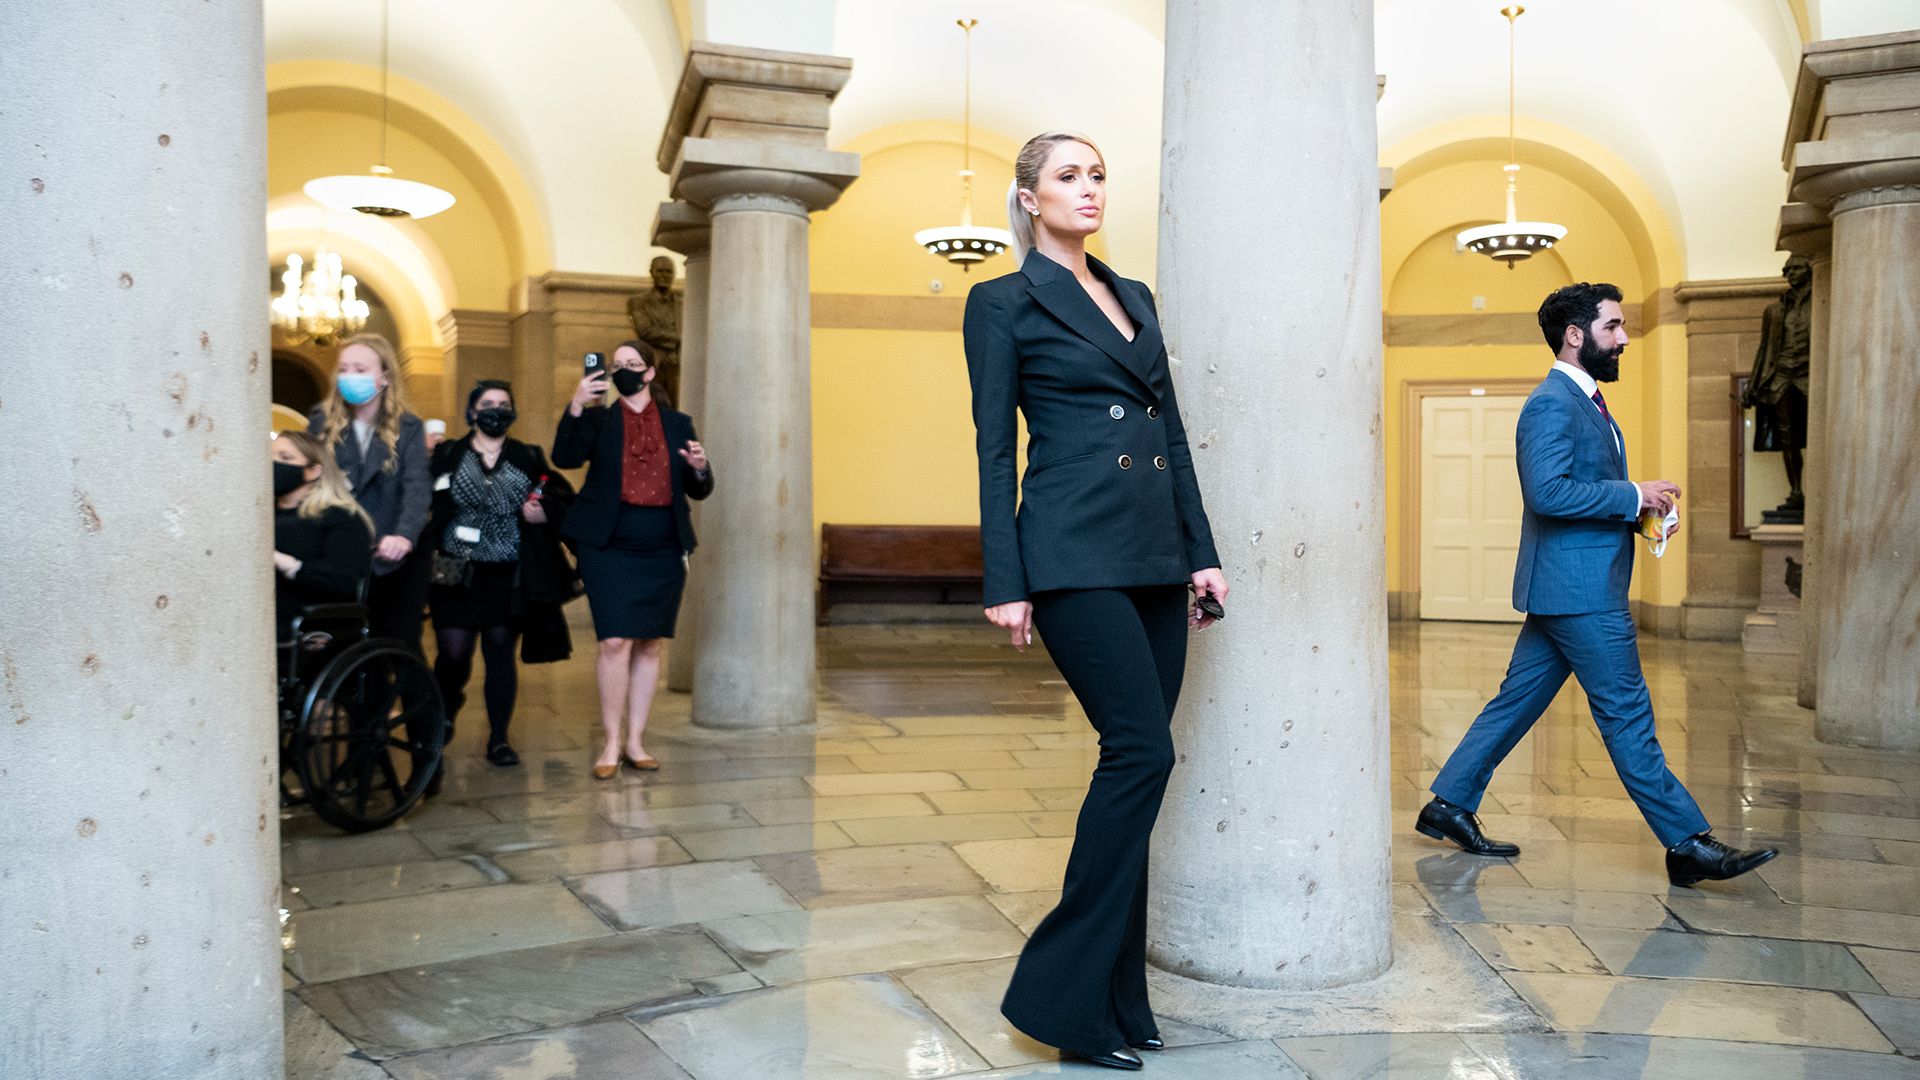 Paris Hilton is seen posing for photographers in the U.S. Capitol Crypt.